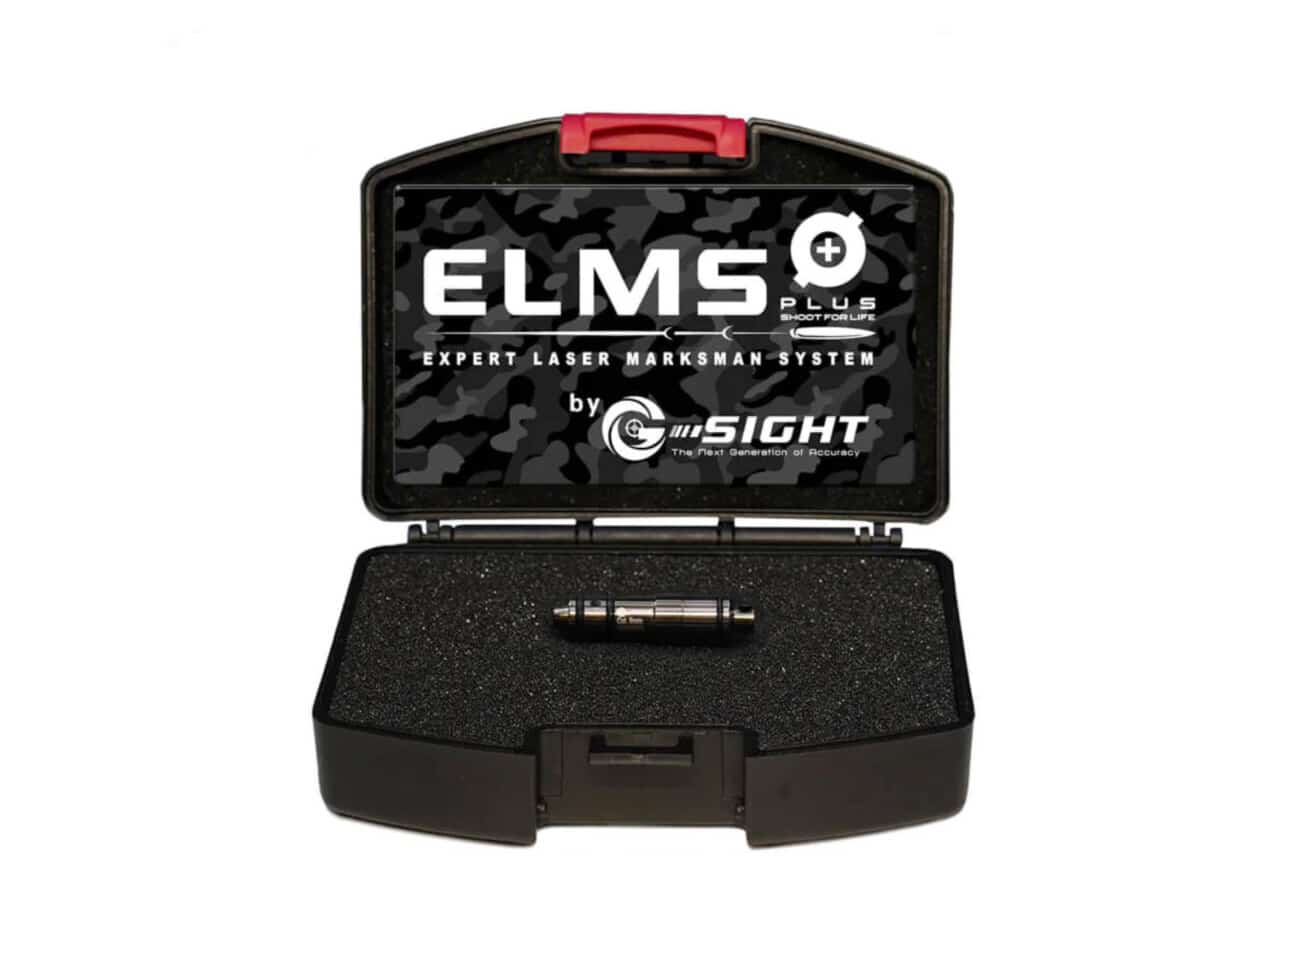 review of the g-sight elms system